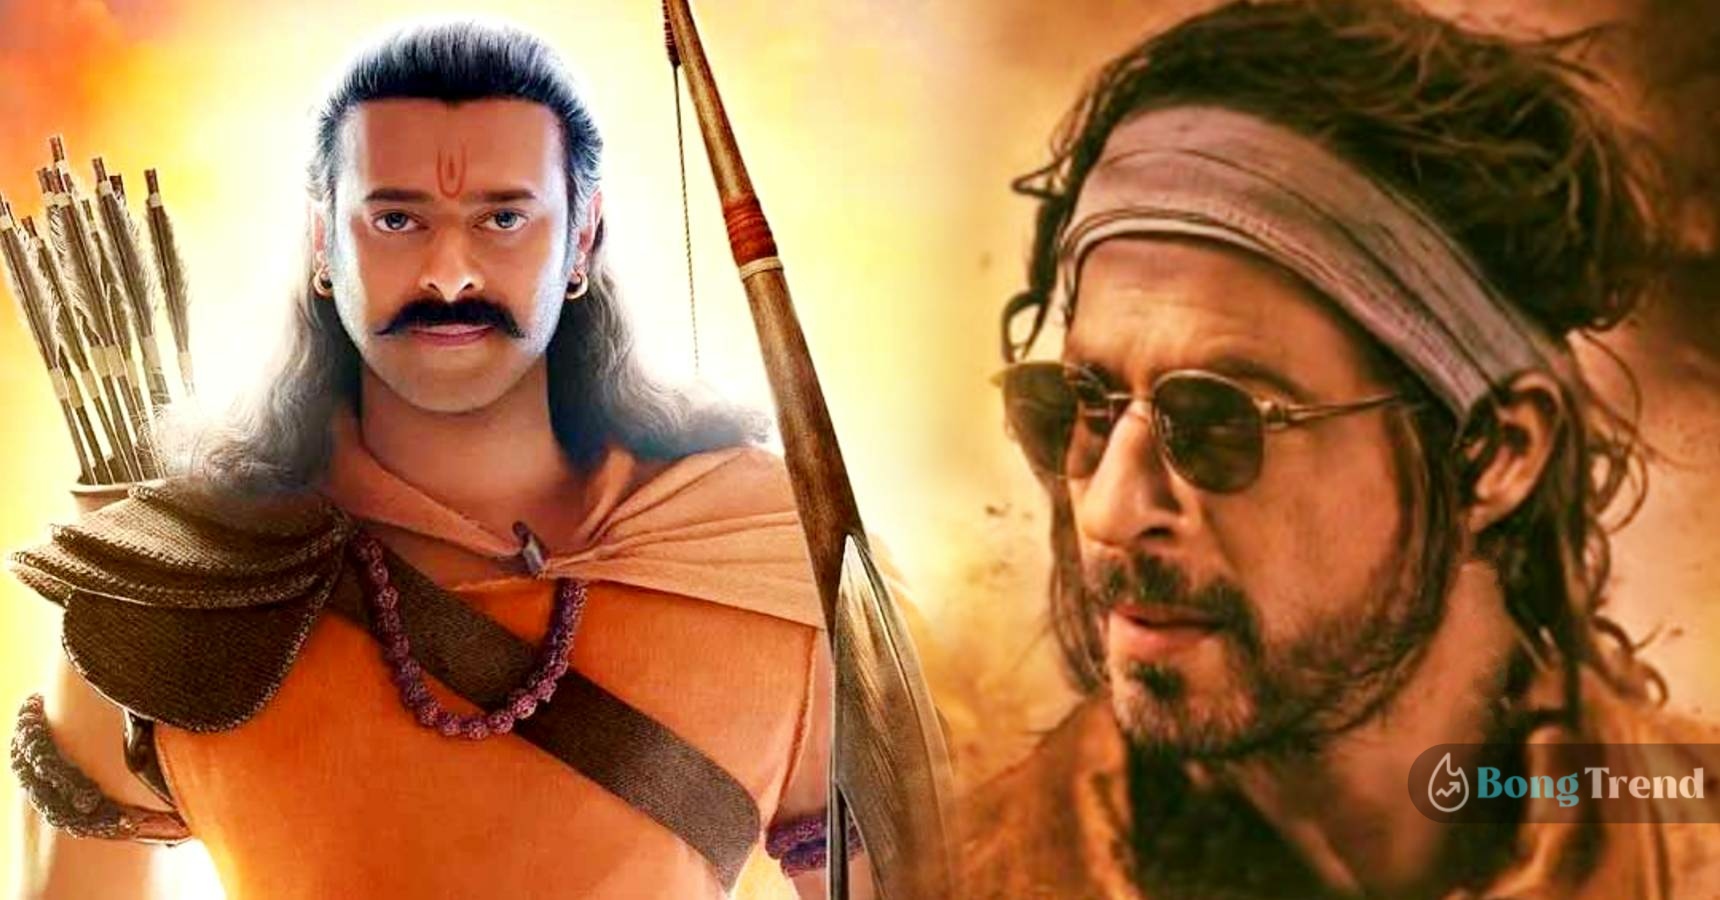 These 5 upcoming blockbuster movies will revive the sinking Bollywood